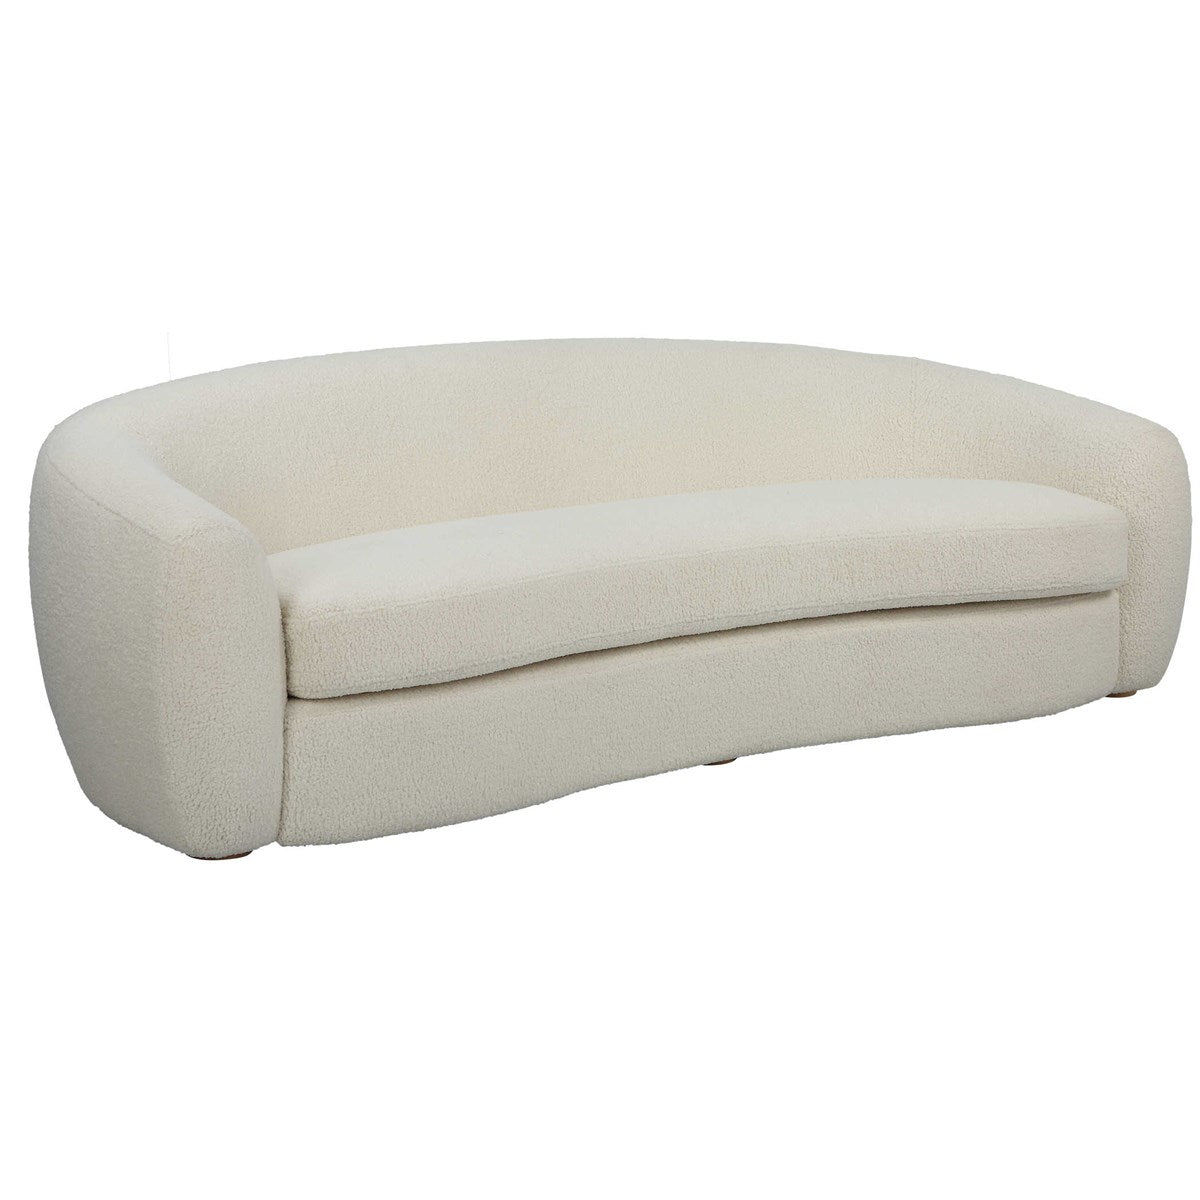 Angle View. The Capra Sofa Draws Inspiration From Old Hollywood Glamour And The Art Deco Movement Wi